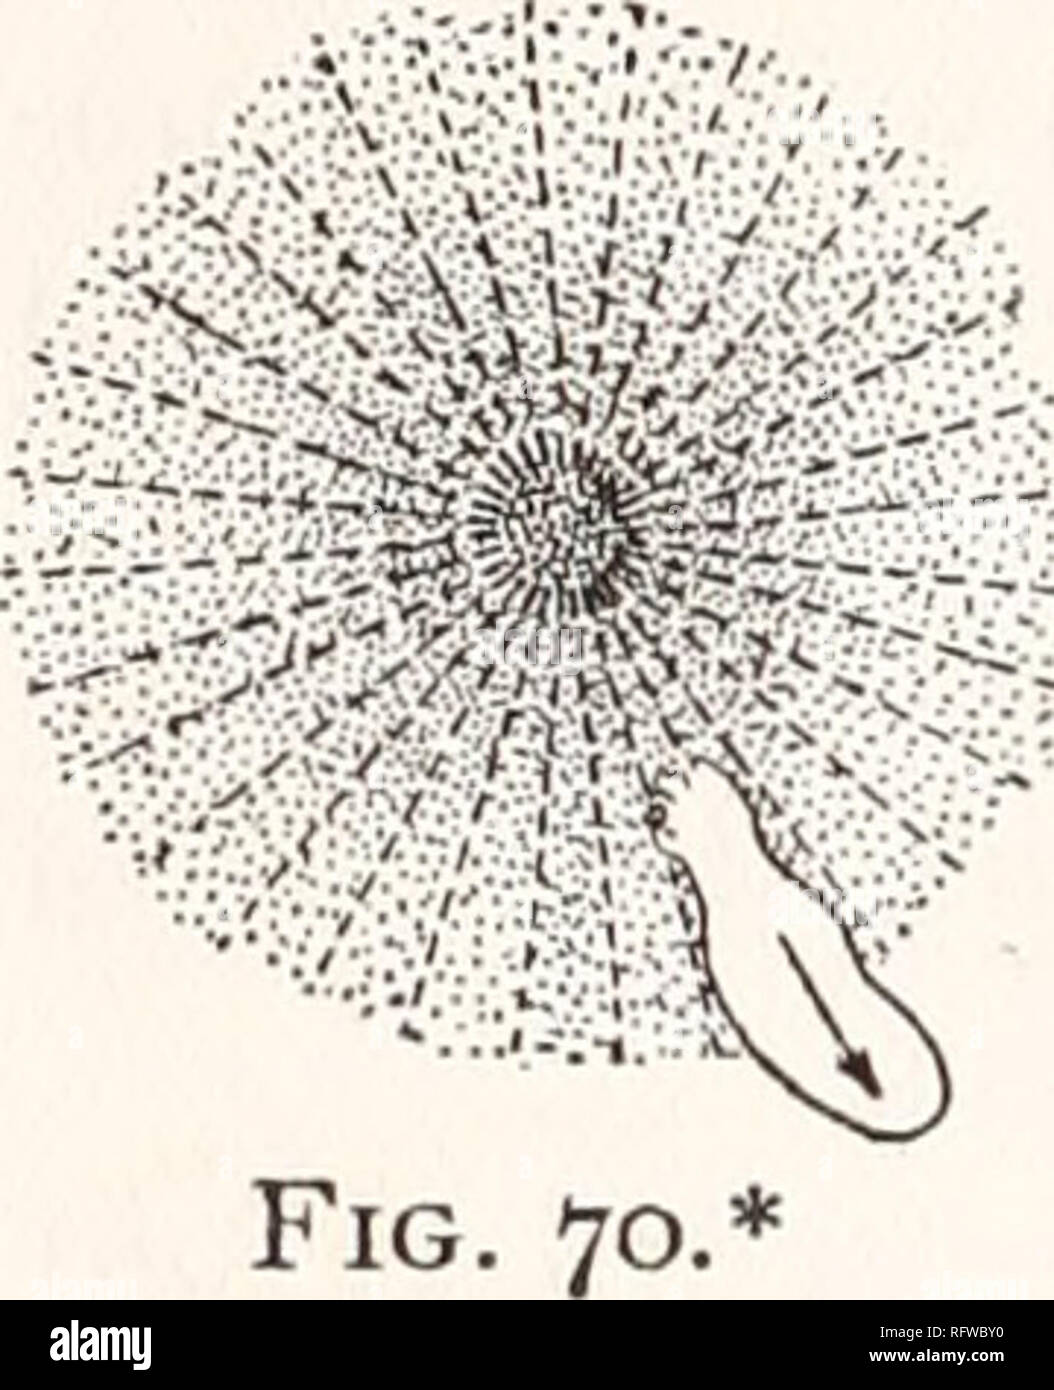 . Carnegie Institution of Washington publication. l88 THE BEHAVIOR OF LOWER ORGANISMS. posterior end ; the two turn to one side, and a pseudopodium starts out in a new place. If the stimulation took place at the anterior end and was limited to a small area, the new pseudopodium starts out at one side of the original anterior end ; the new course followed, therefore, forms only a slight angle with the former one (Fig. 71, a). But if the stimulus affects all of one side of the body, or a still greater portion of its area, pseudopodia are sent out on the opposite side ; the Amoeba then creeps dir Stock Photo